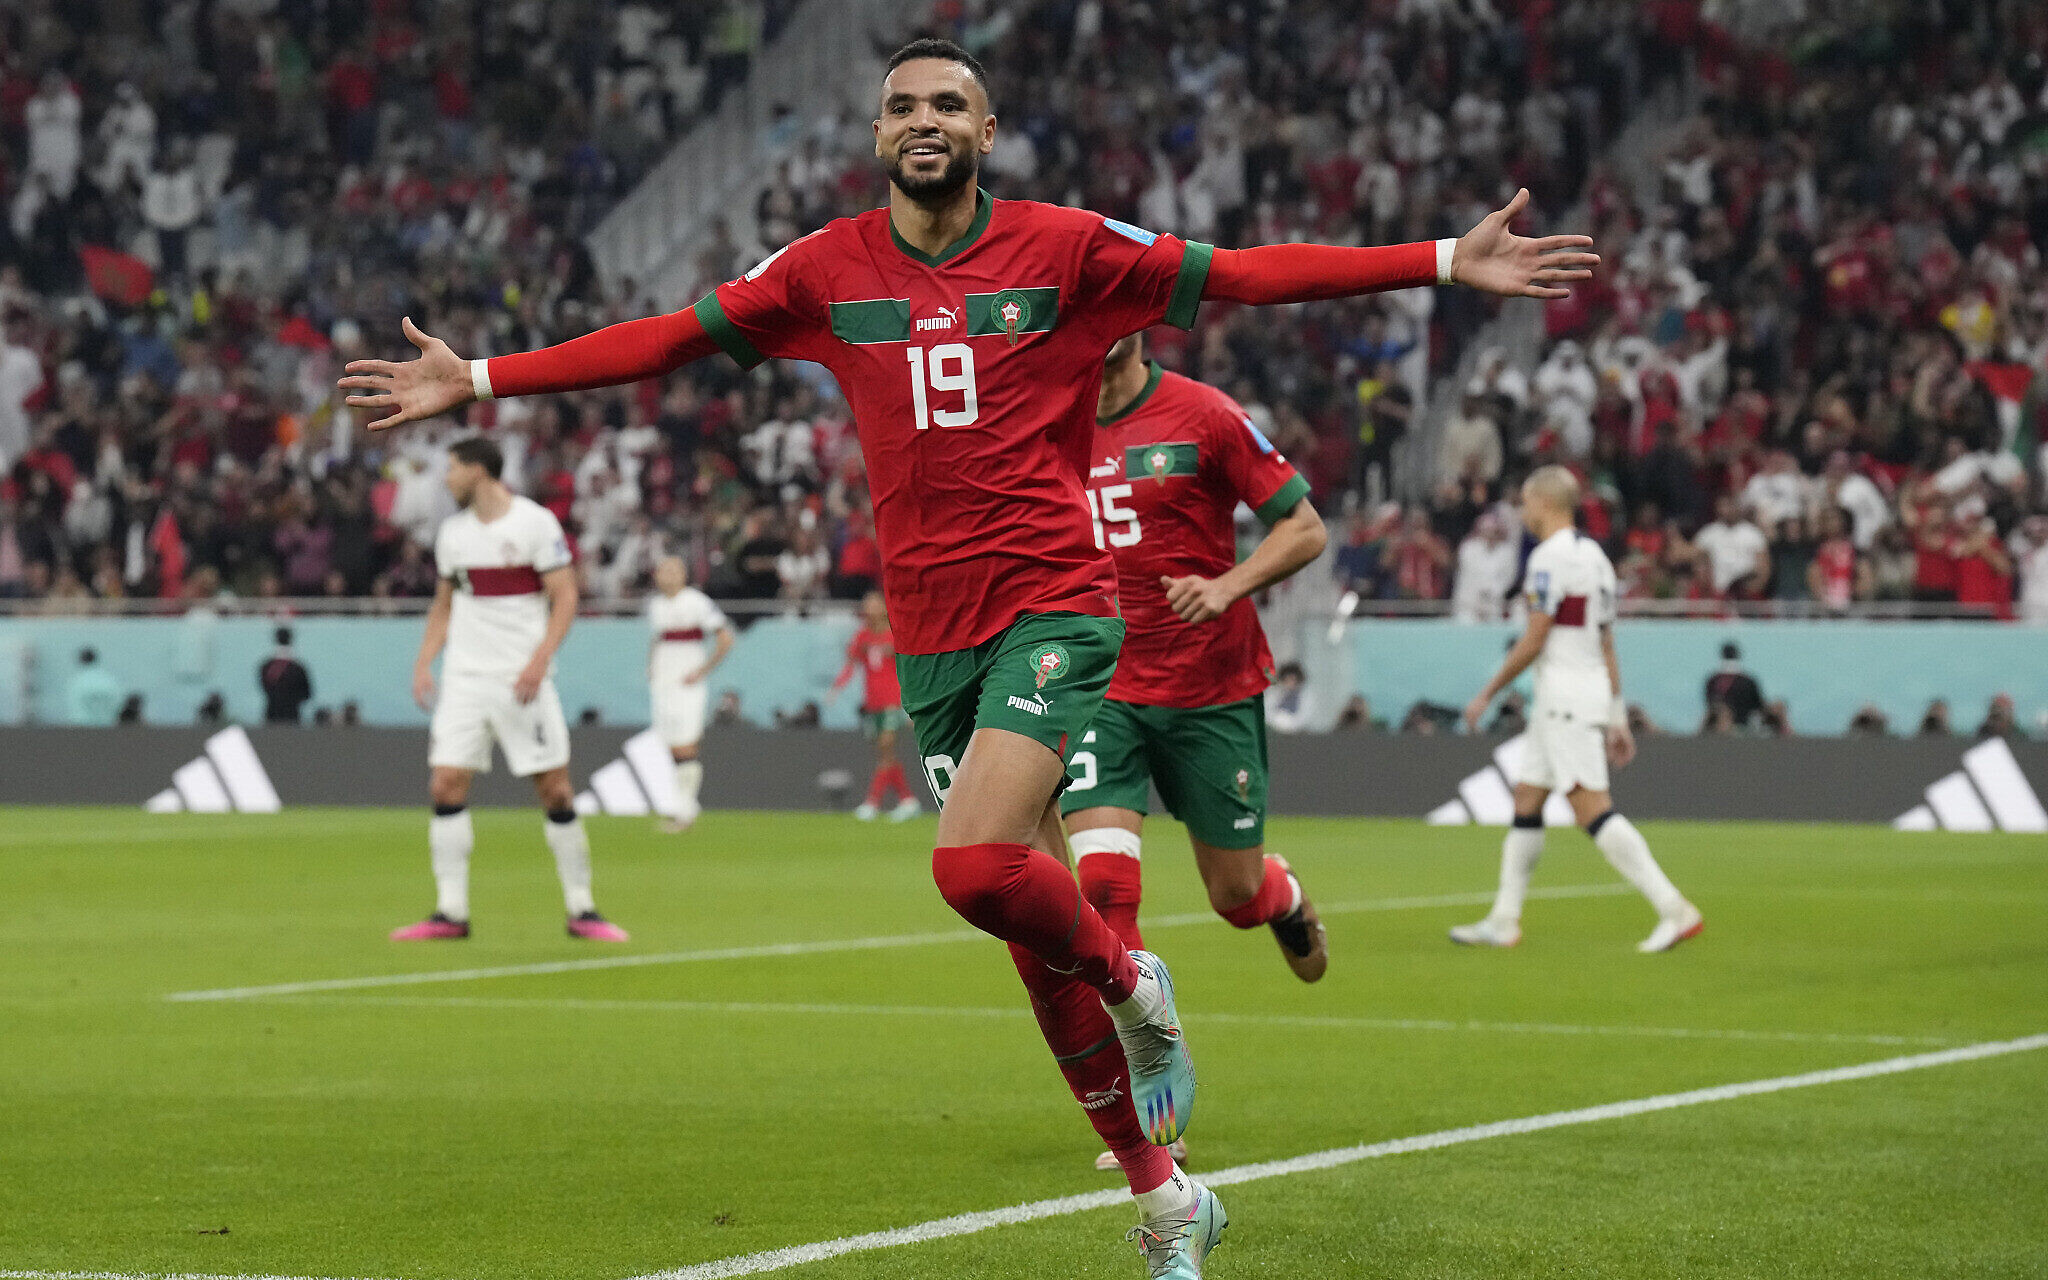 Morocco stuns Portugal 1-0 to advance to World Cup semis, first Arab nation to do so The Times of Israel